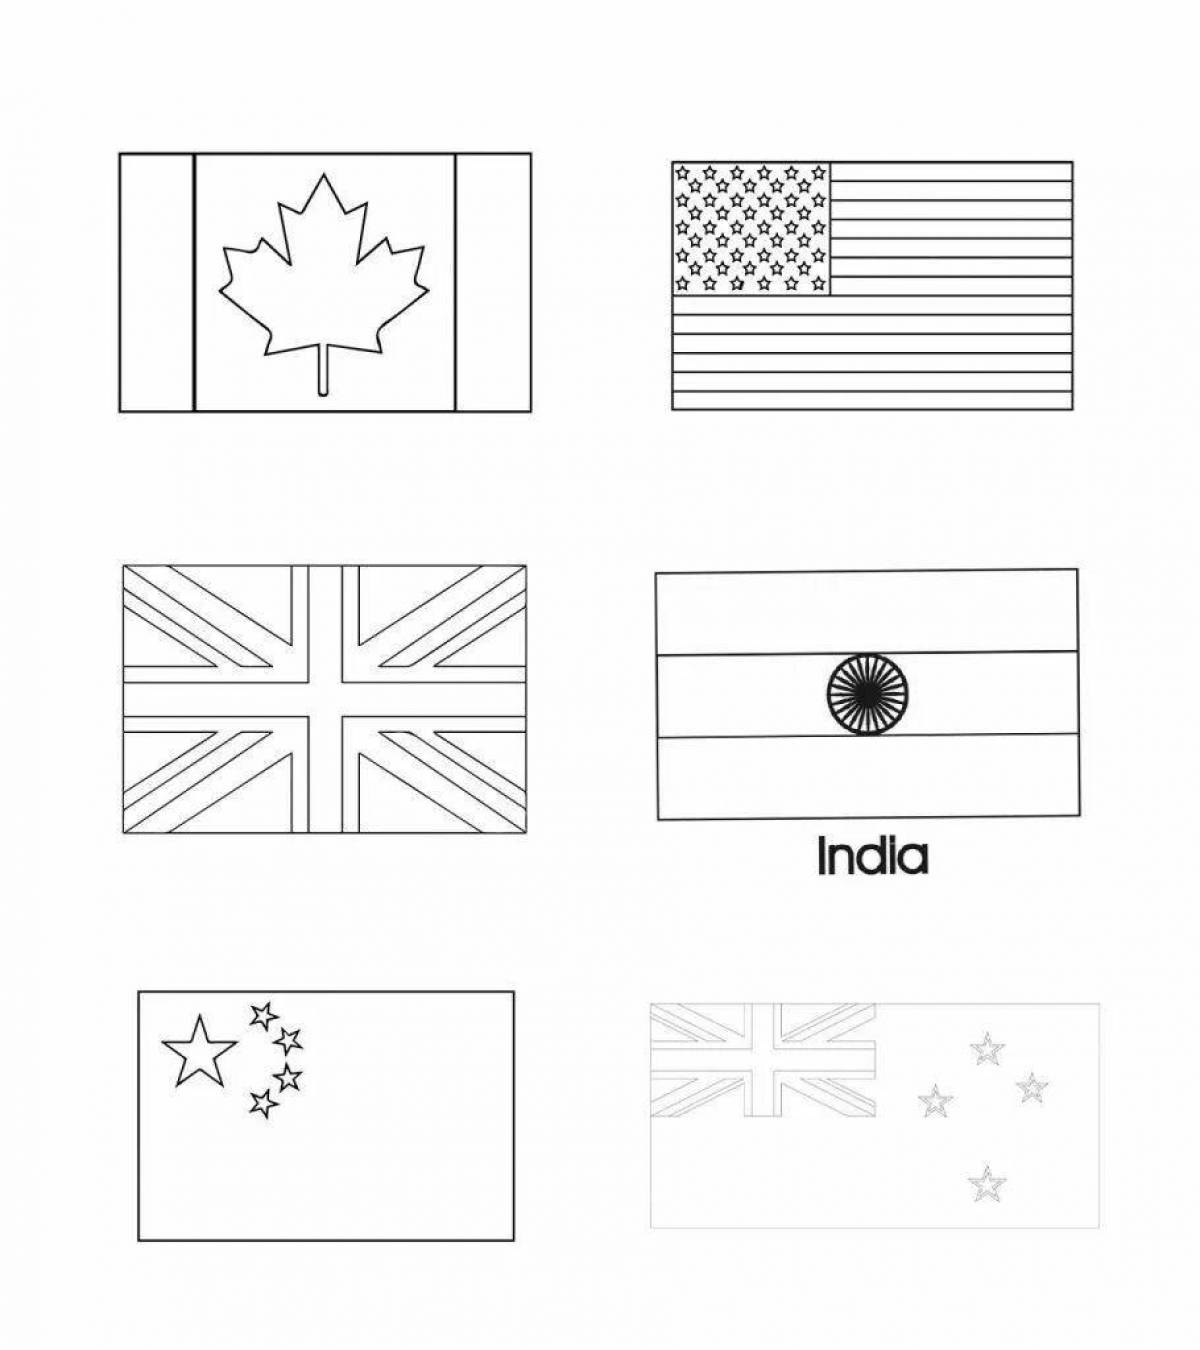 Country flags with names #5